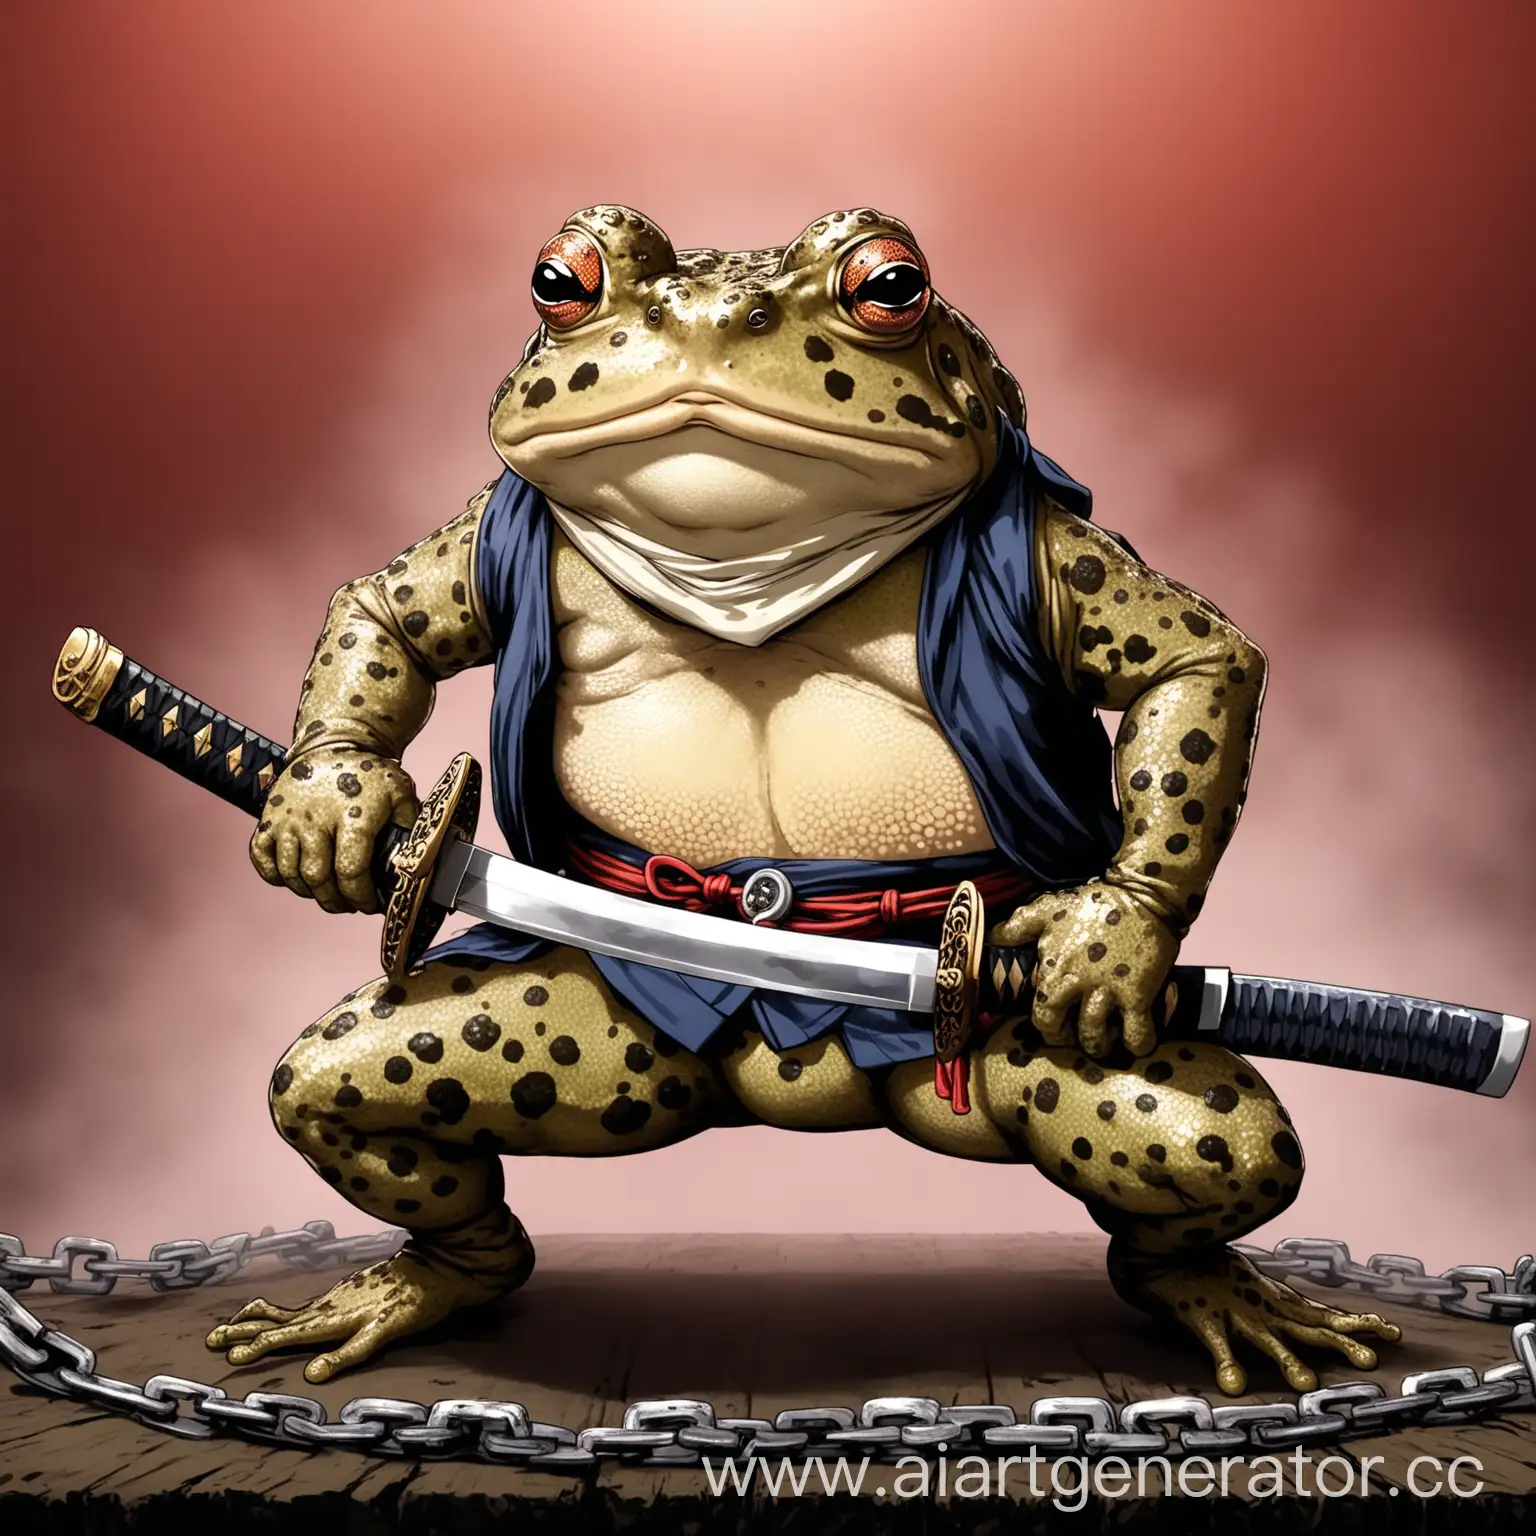 Japanese-style toad with a katana in his mouth breaks chains